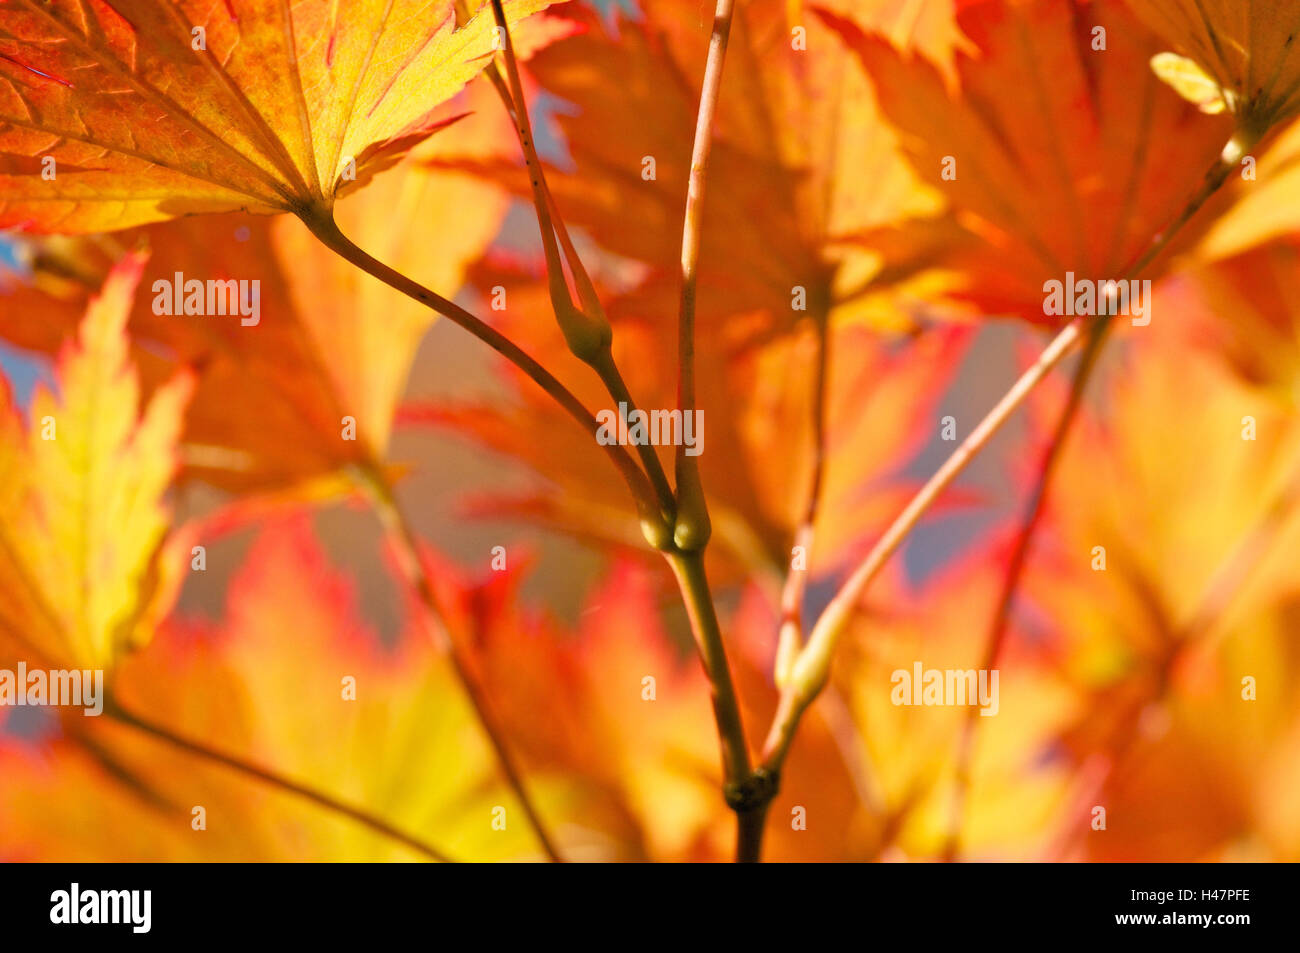 Maple leaves, autumn colouring, close-up, Stock Photo